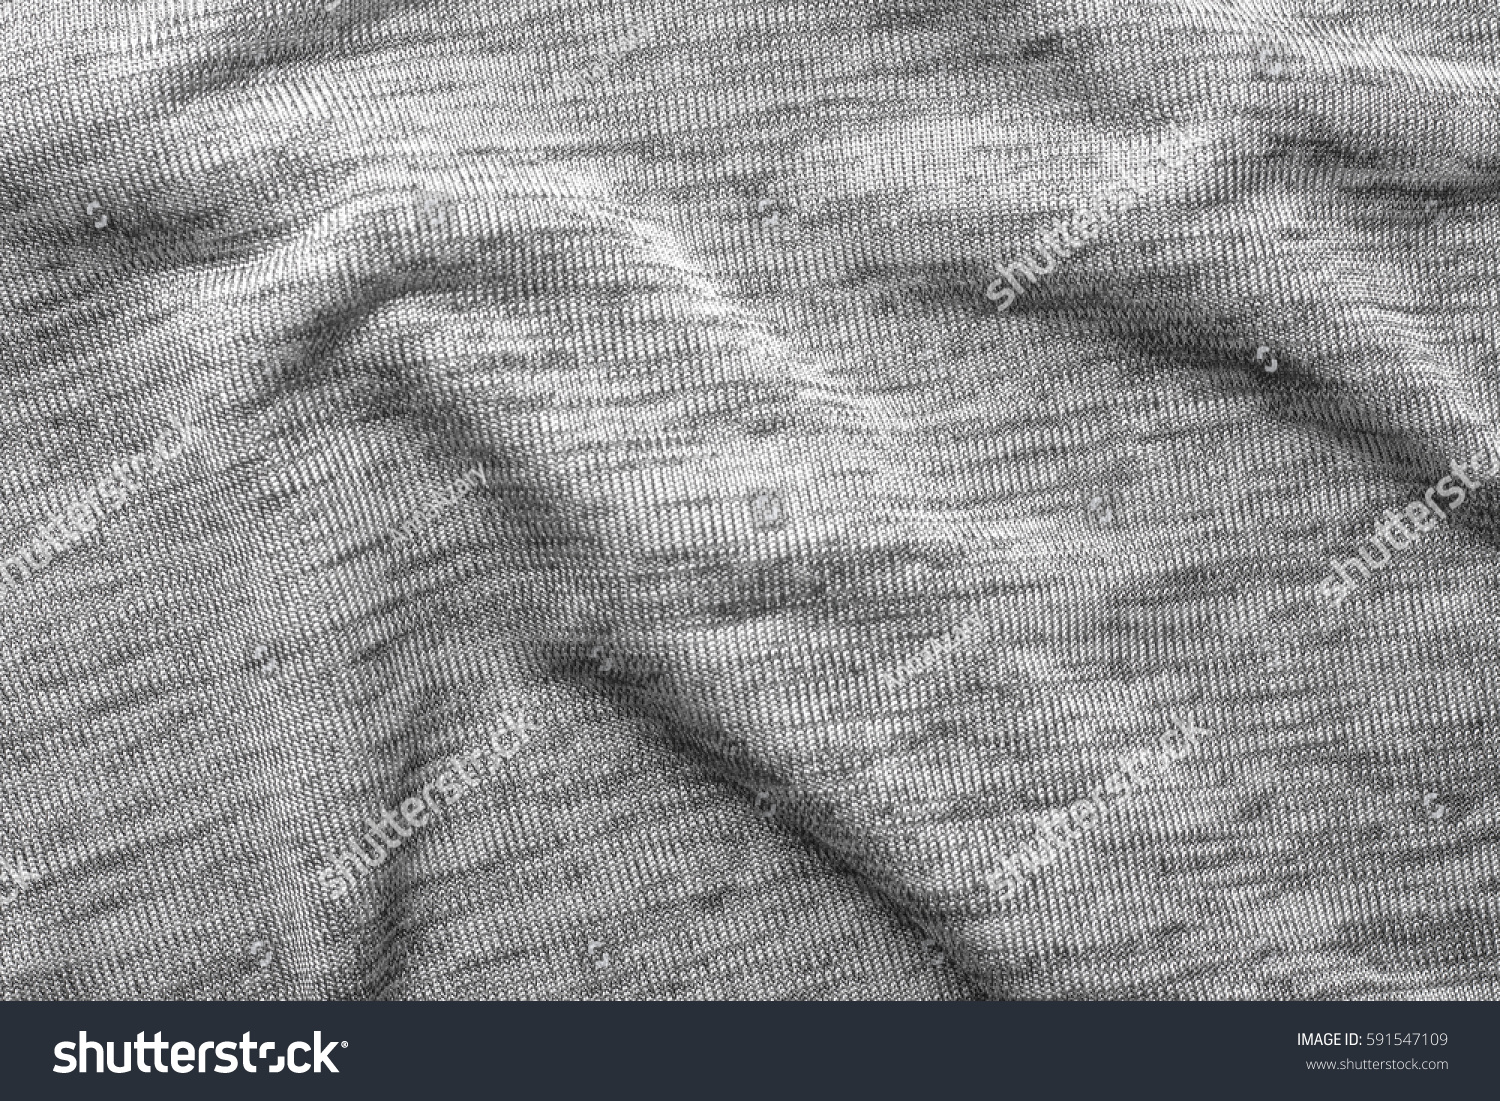 gray background, fabric, textile, wave #591547109